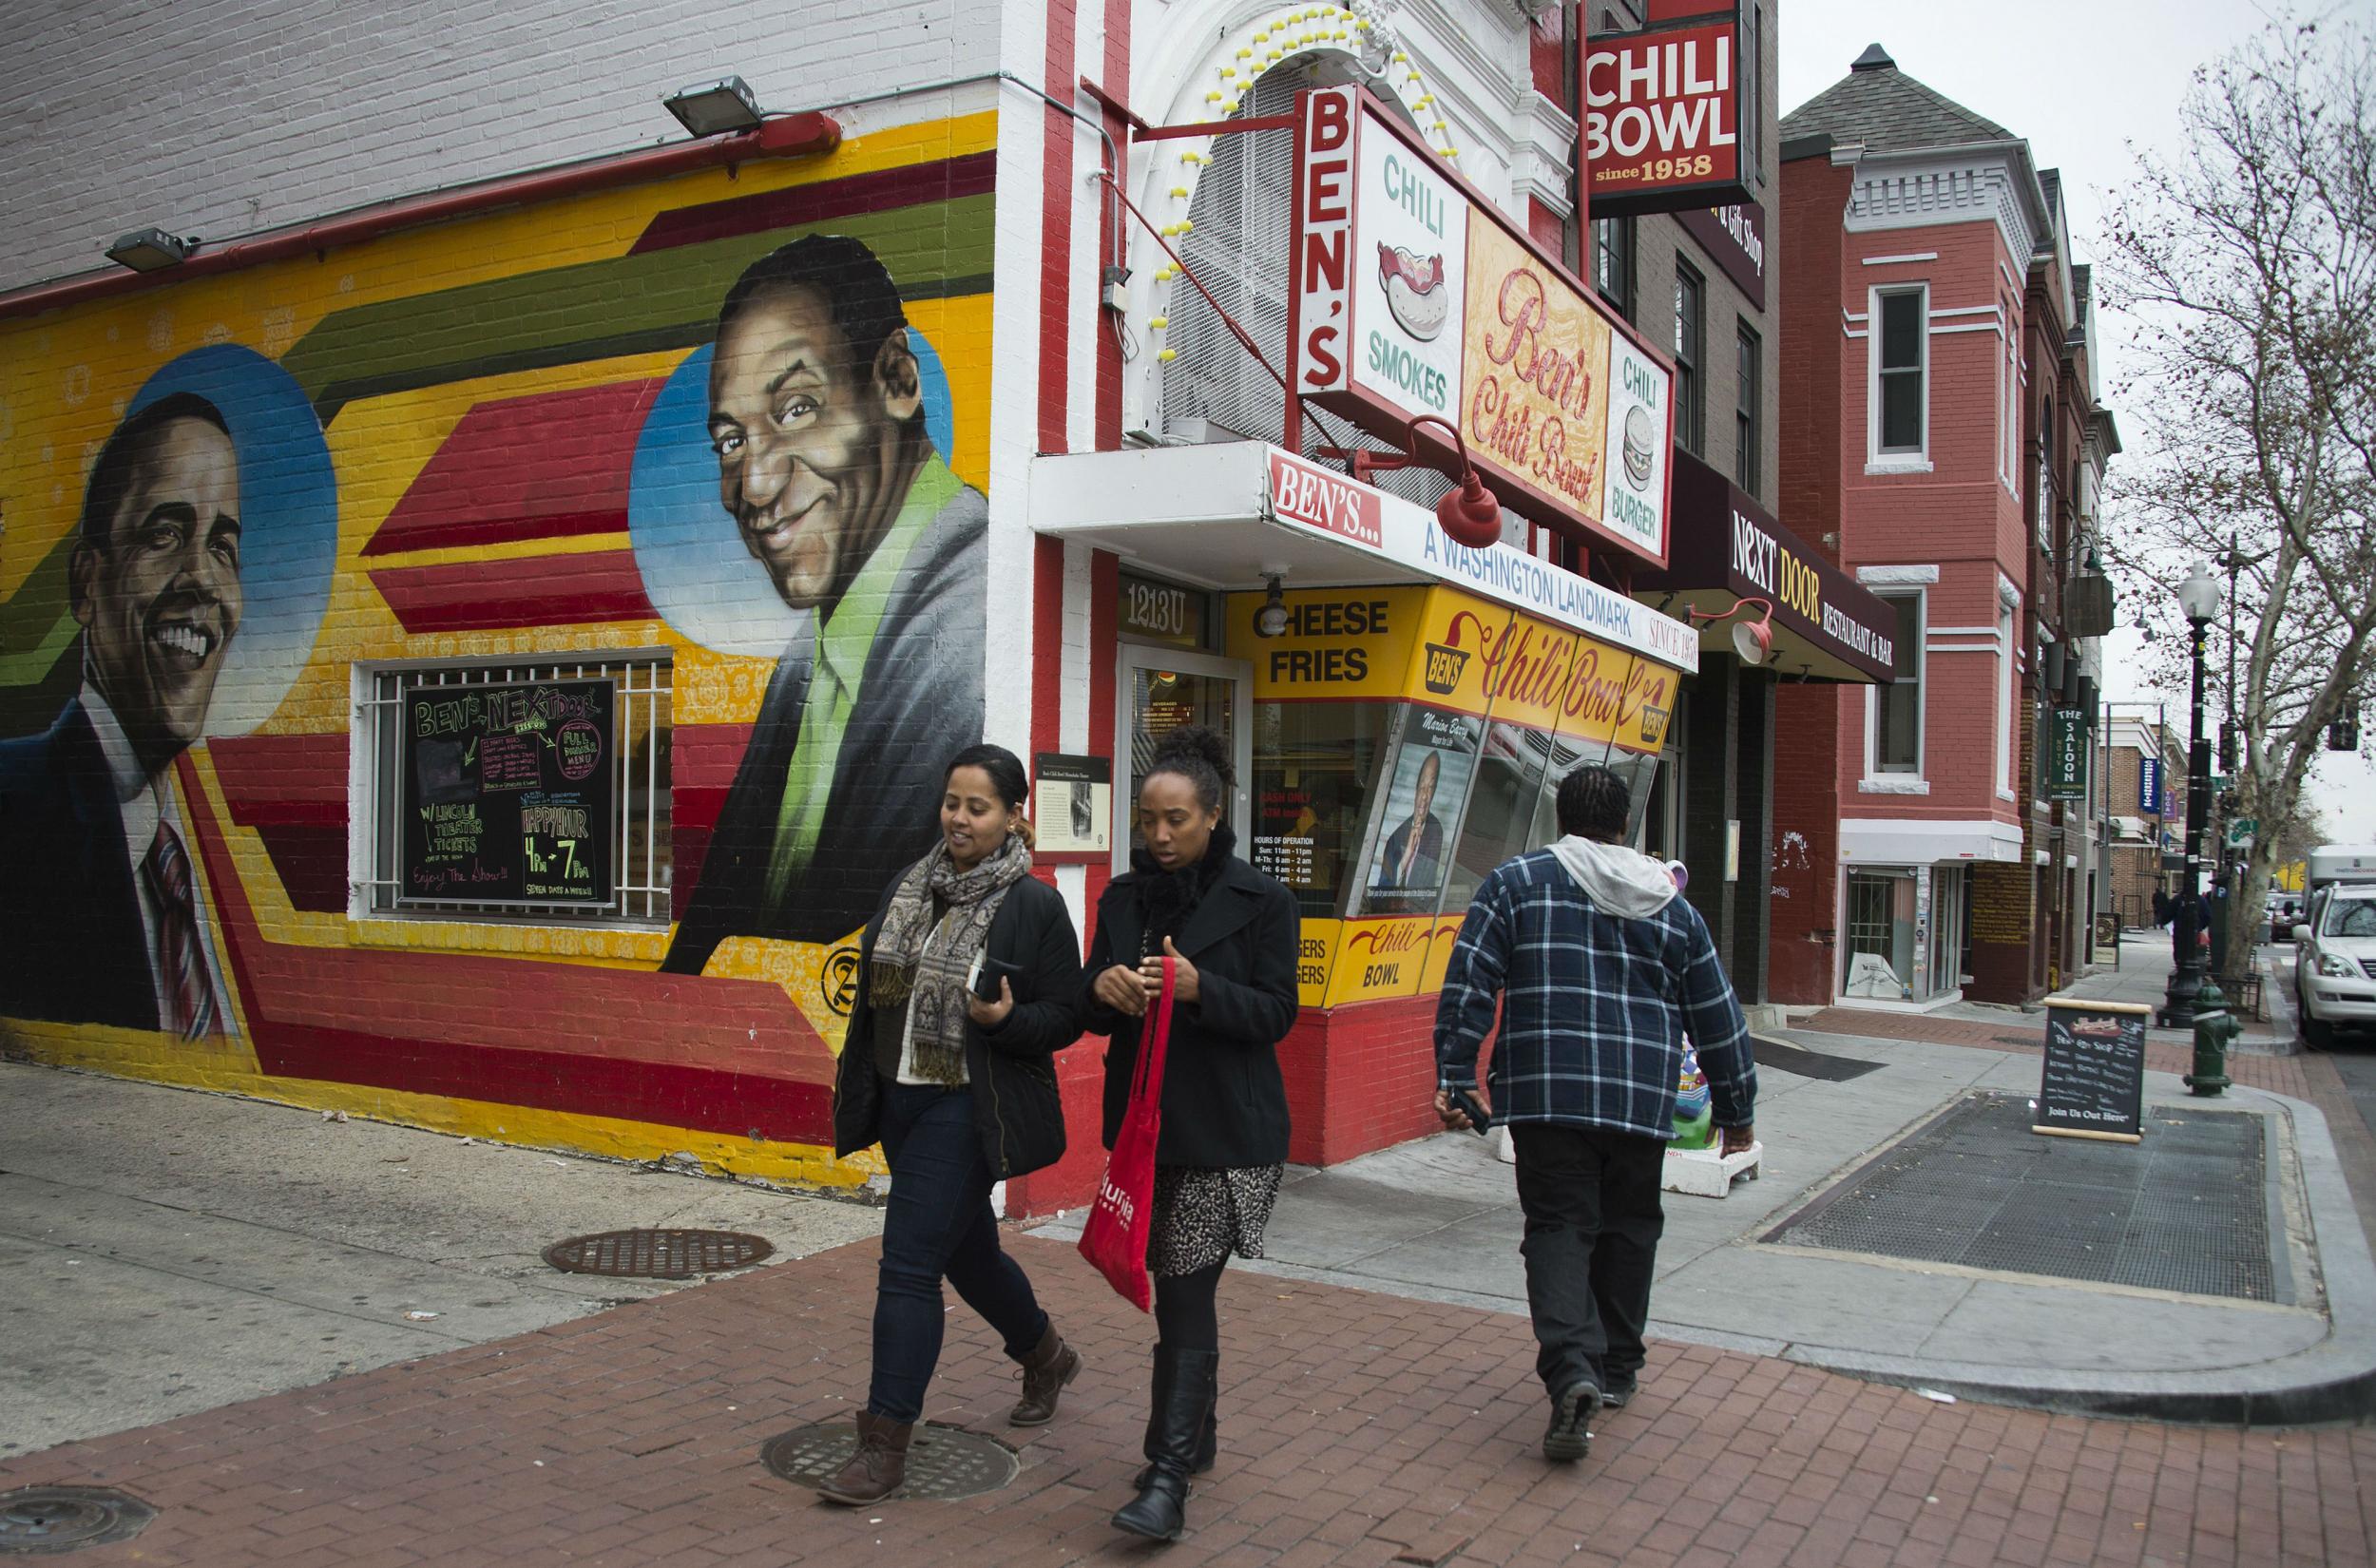 Ben's Chili Bowl has found itself at the centre of controversy